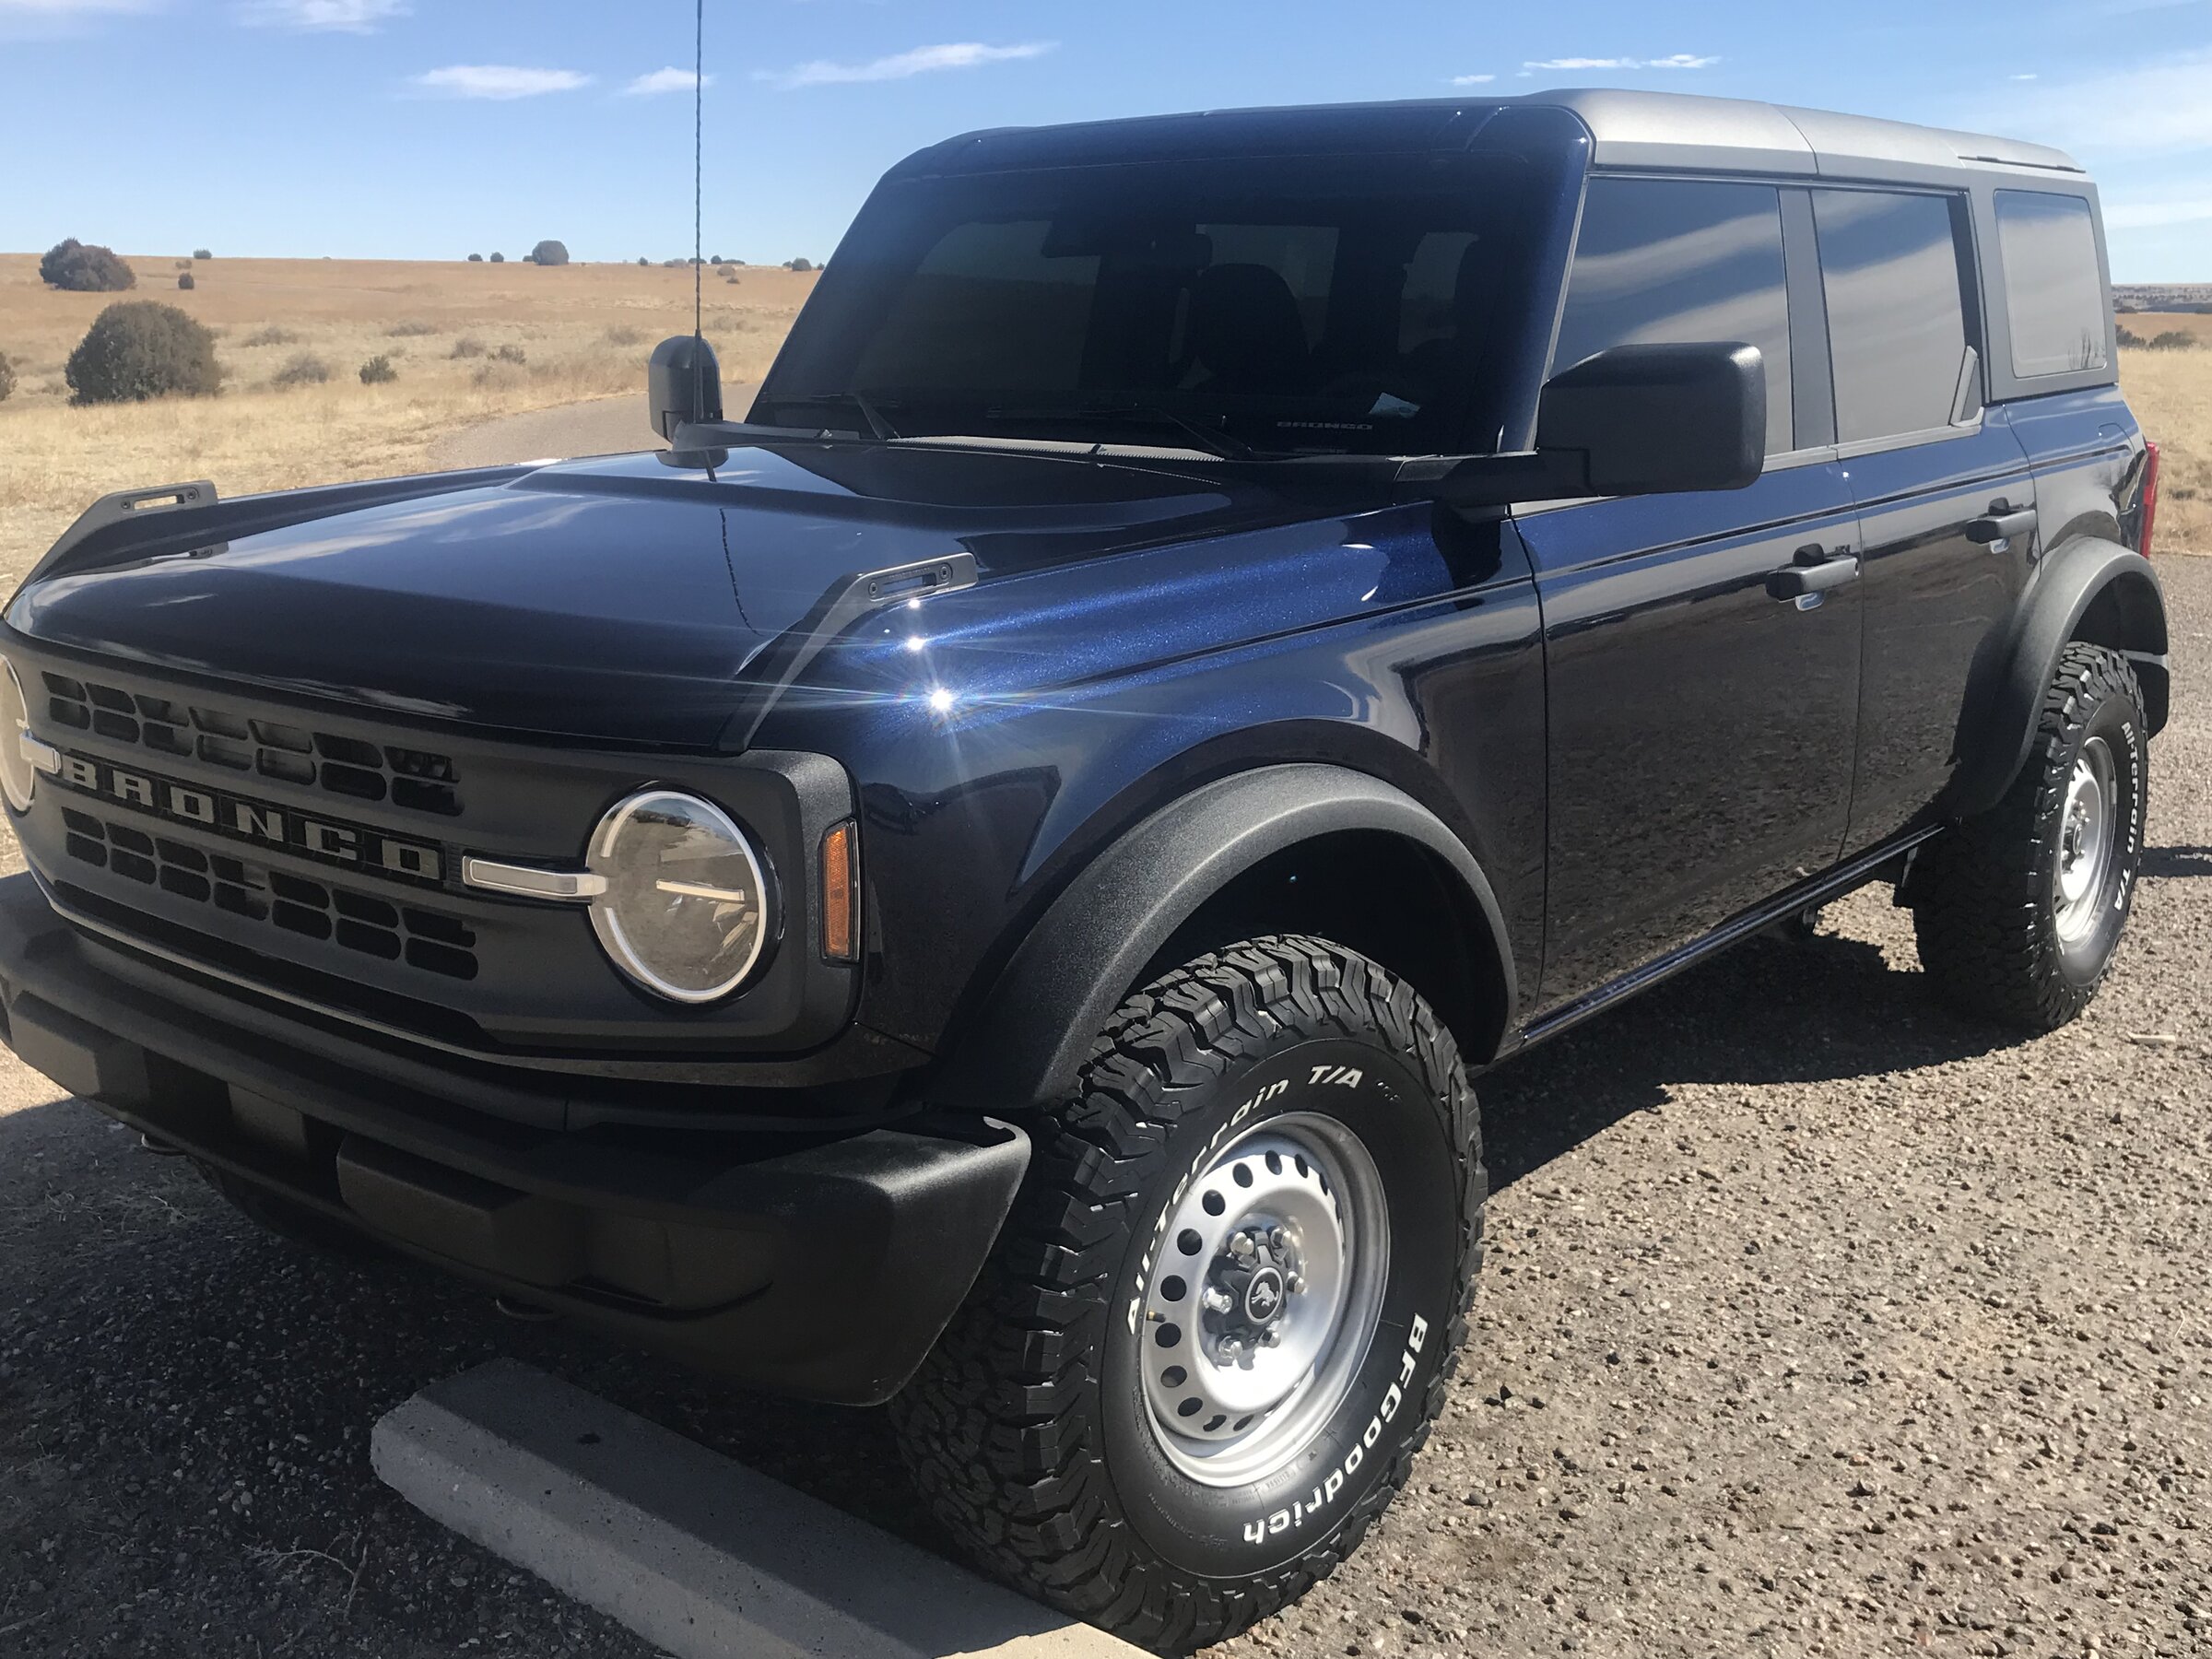 Ford Bronco Show us your installed wheel / tire upgrades here! (Pics) EB45EF6A-85F4-44D8-8D58-10C8B0E9FD4D